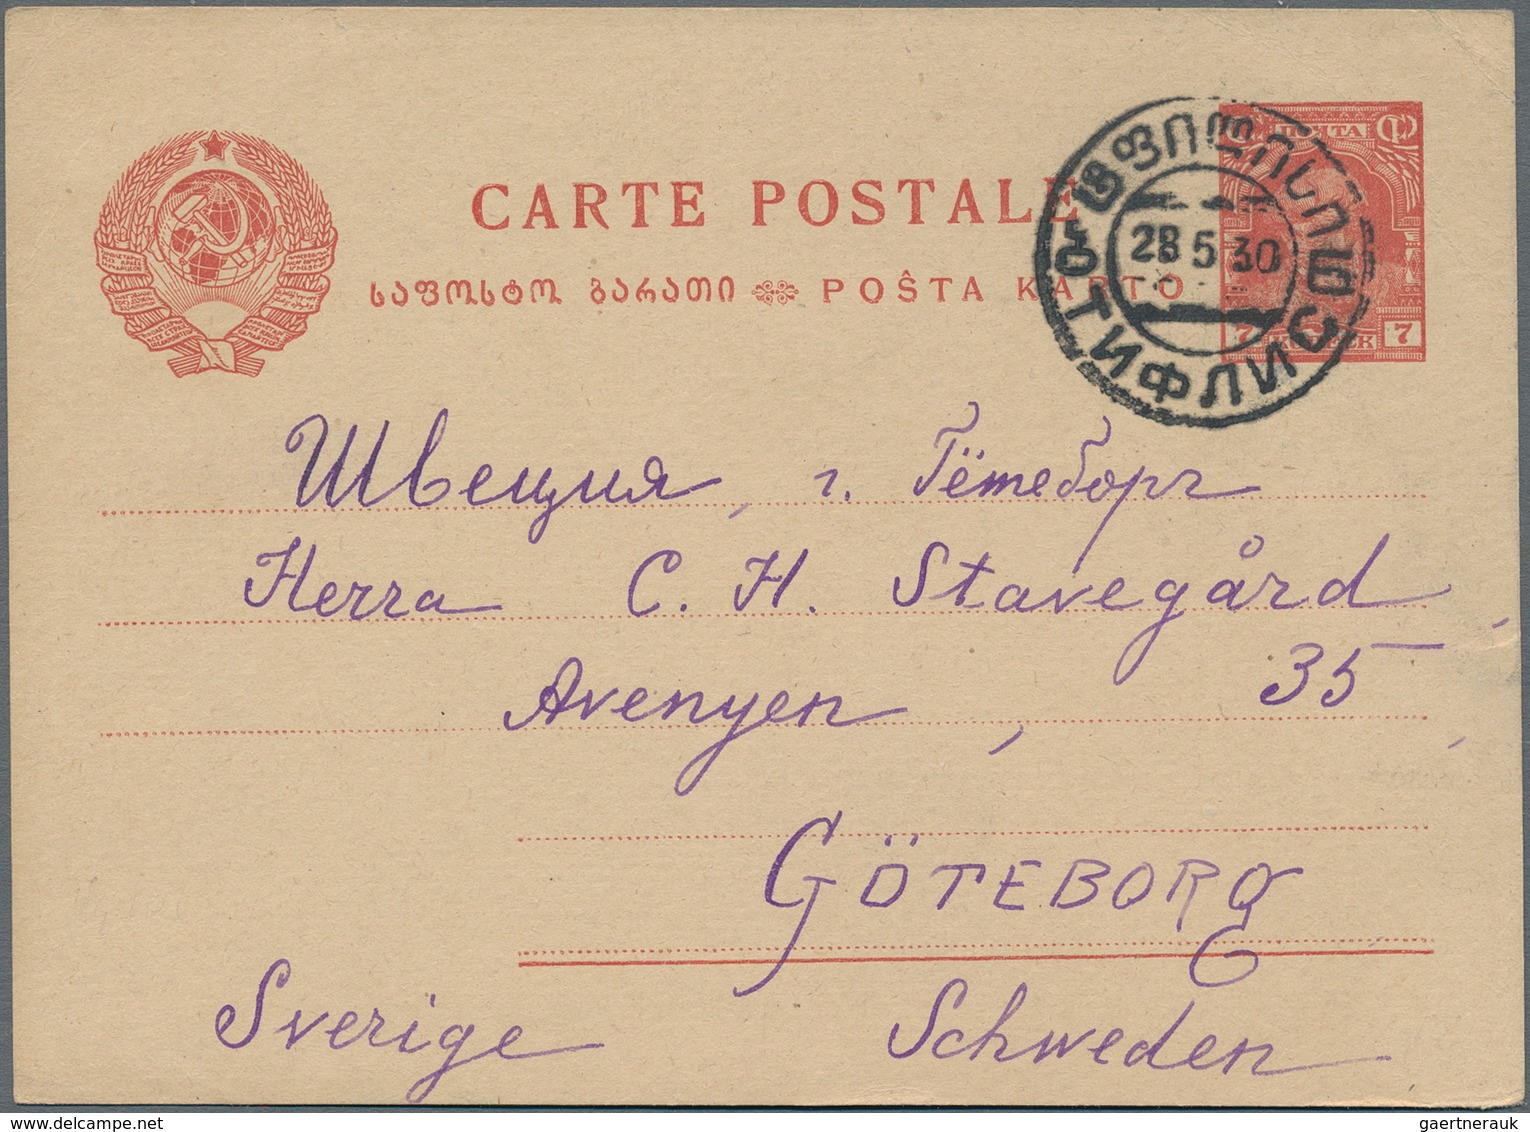 Sowjetunion - Ganzsachen: 1923/80 (ca.) holding of about 410 letters, cards, postal stationaries, re